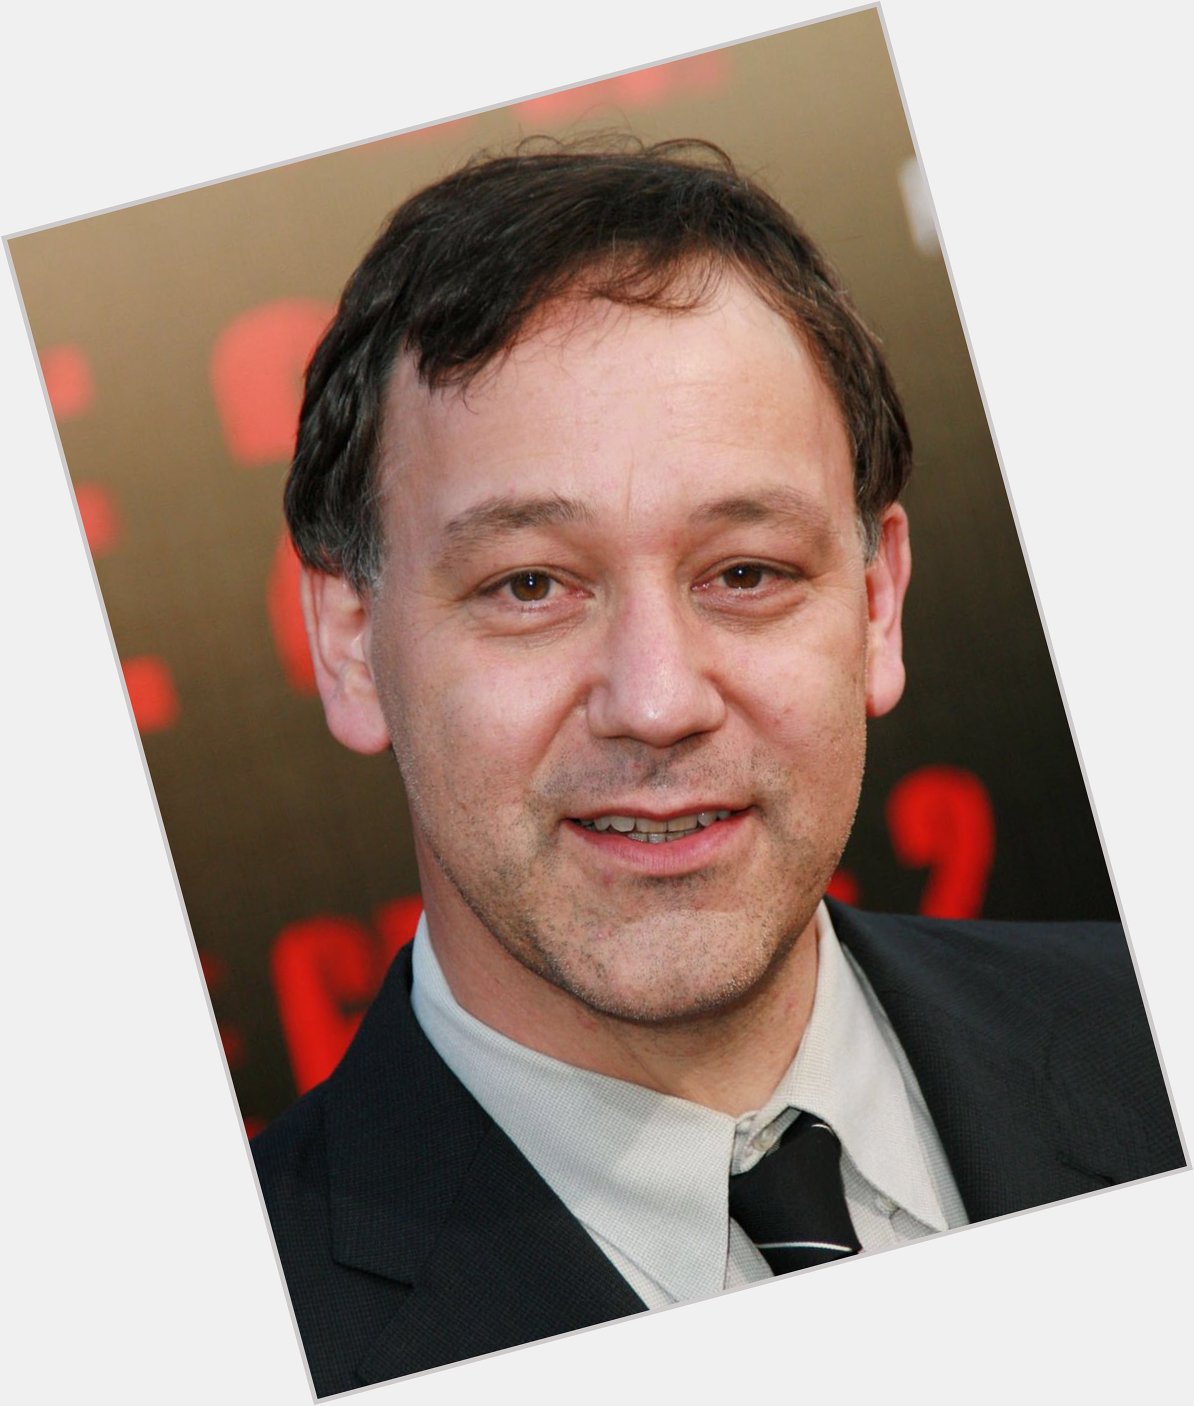 Happy birthday Sam Raimi! He made my favorite horror franchise and one of the best superhero movies ever. 